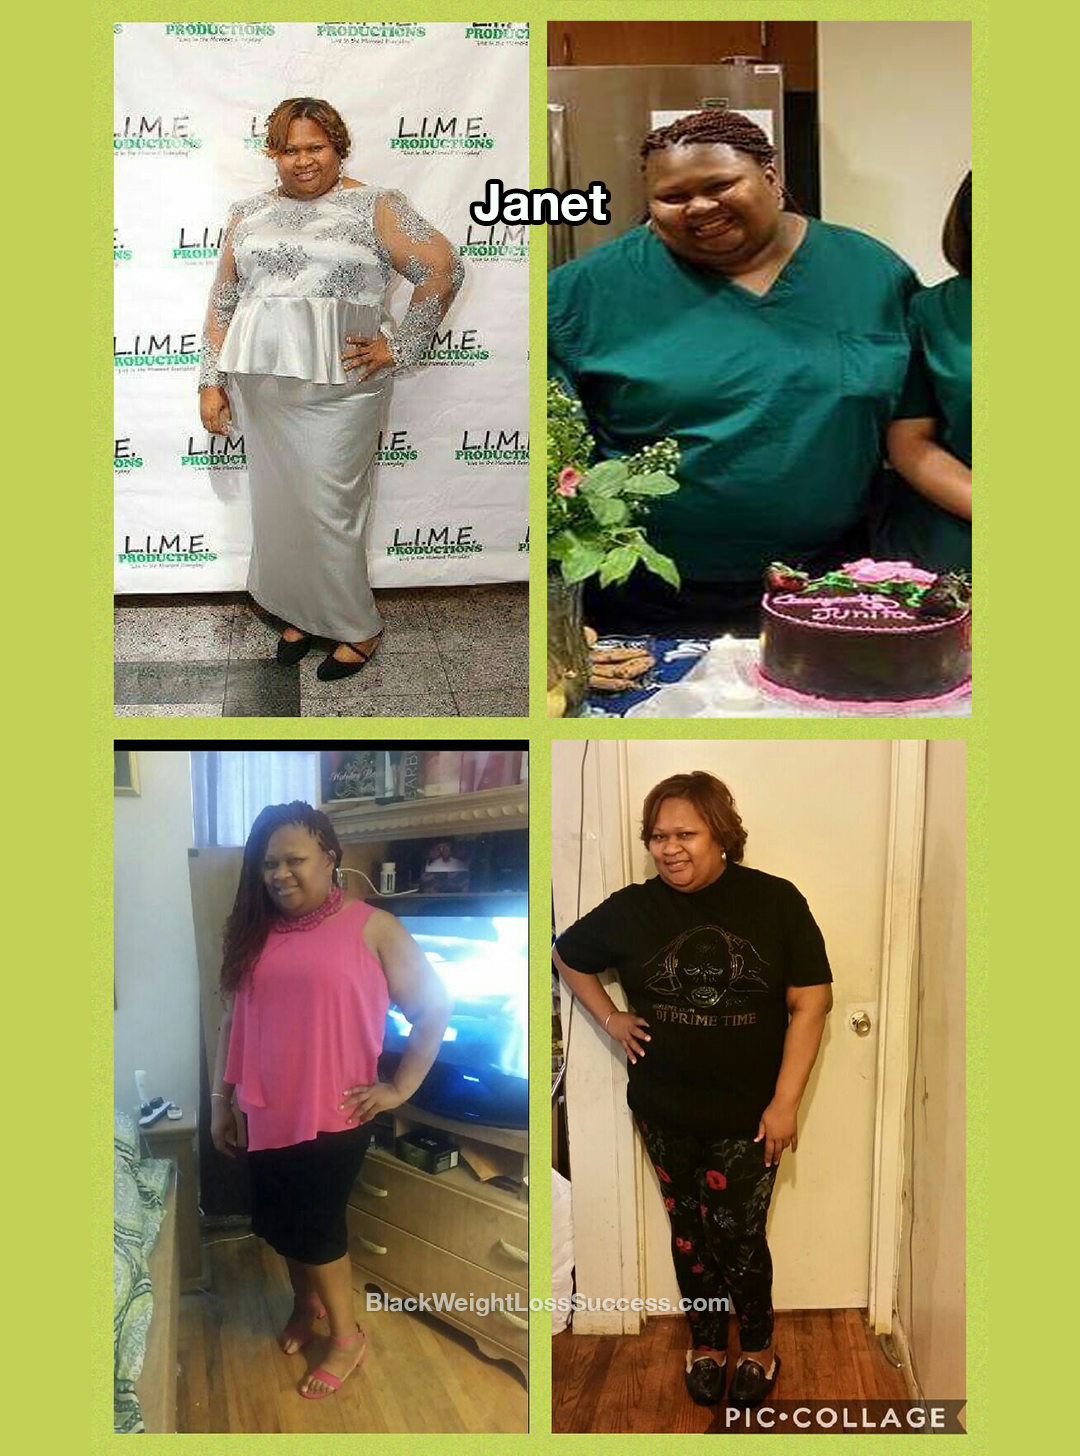 Janet lost 155 pounds